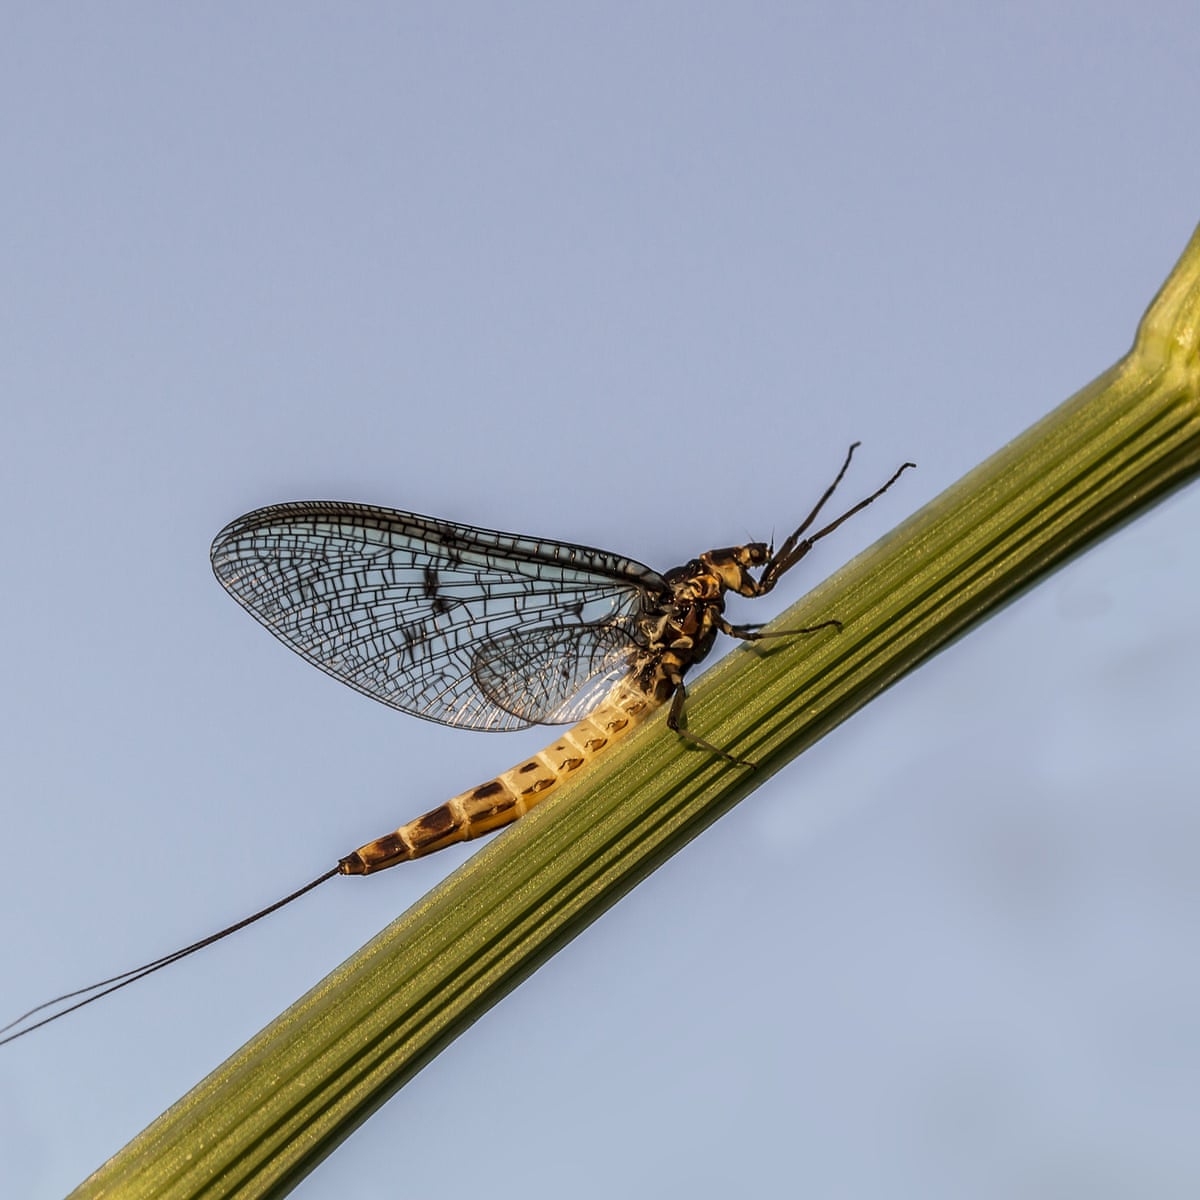 Insect declines: new alarm over mayfly is 'tip of iceberg', warn experts | Insects | The Guardian